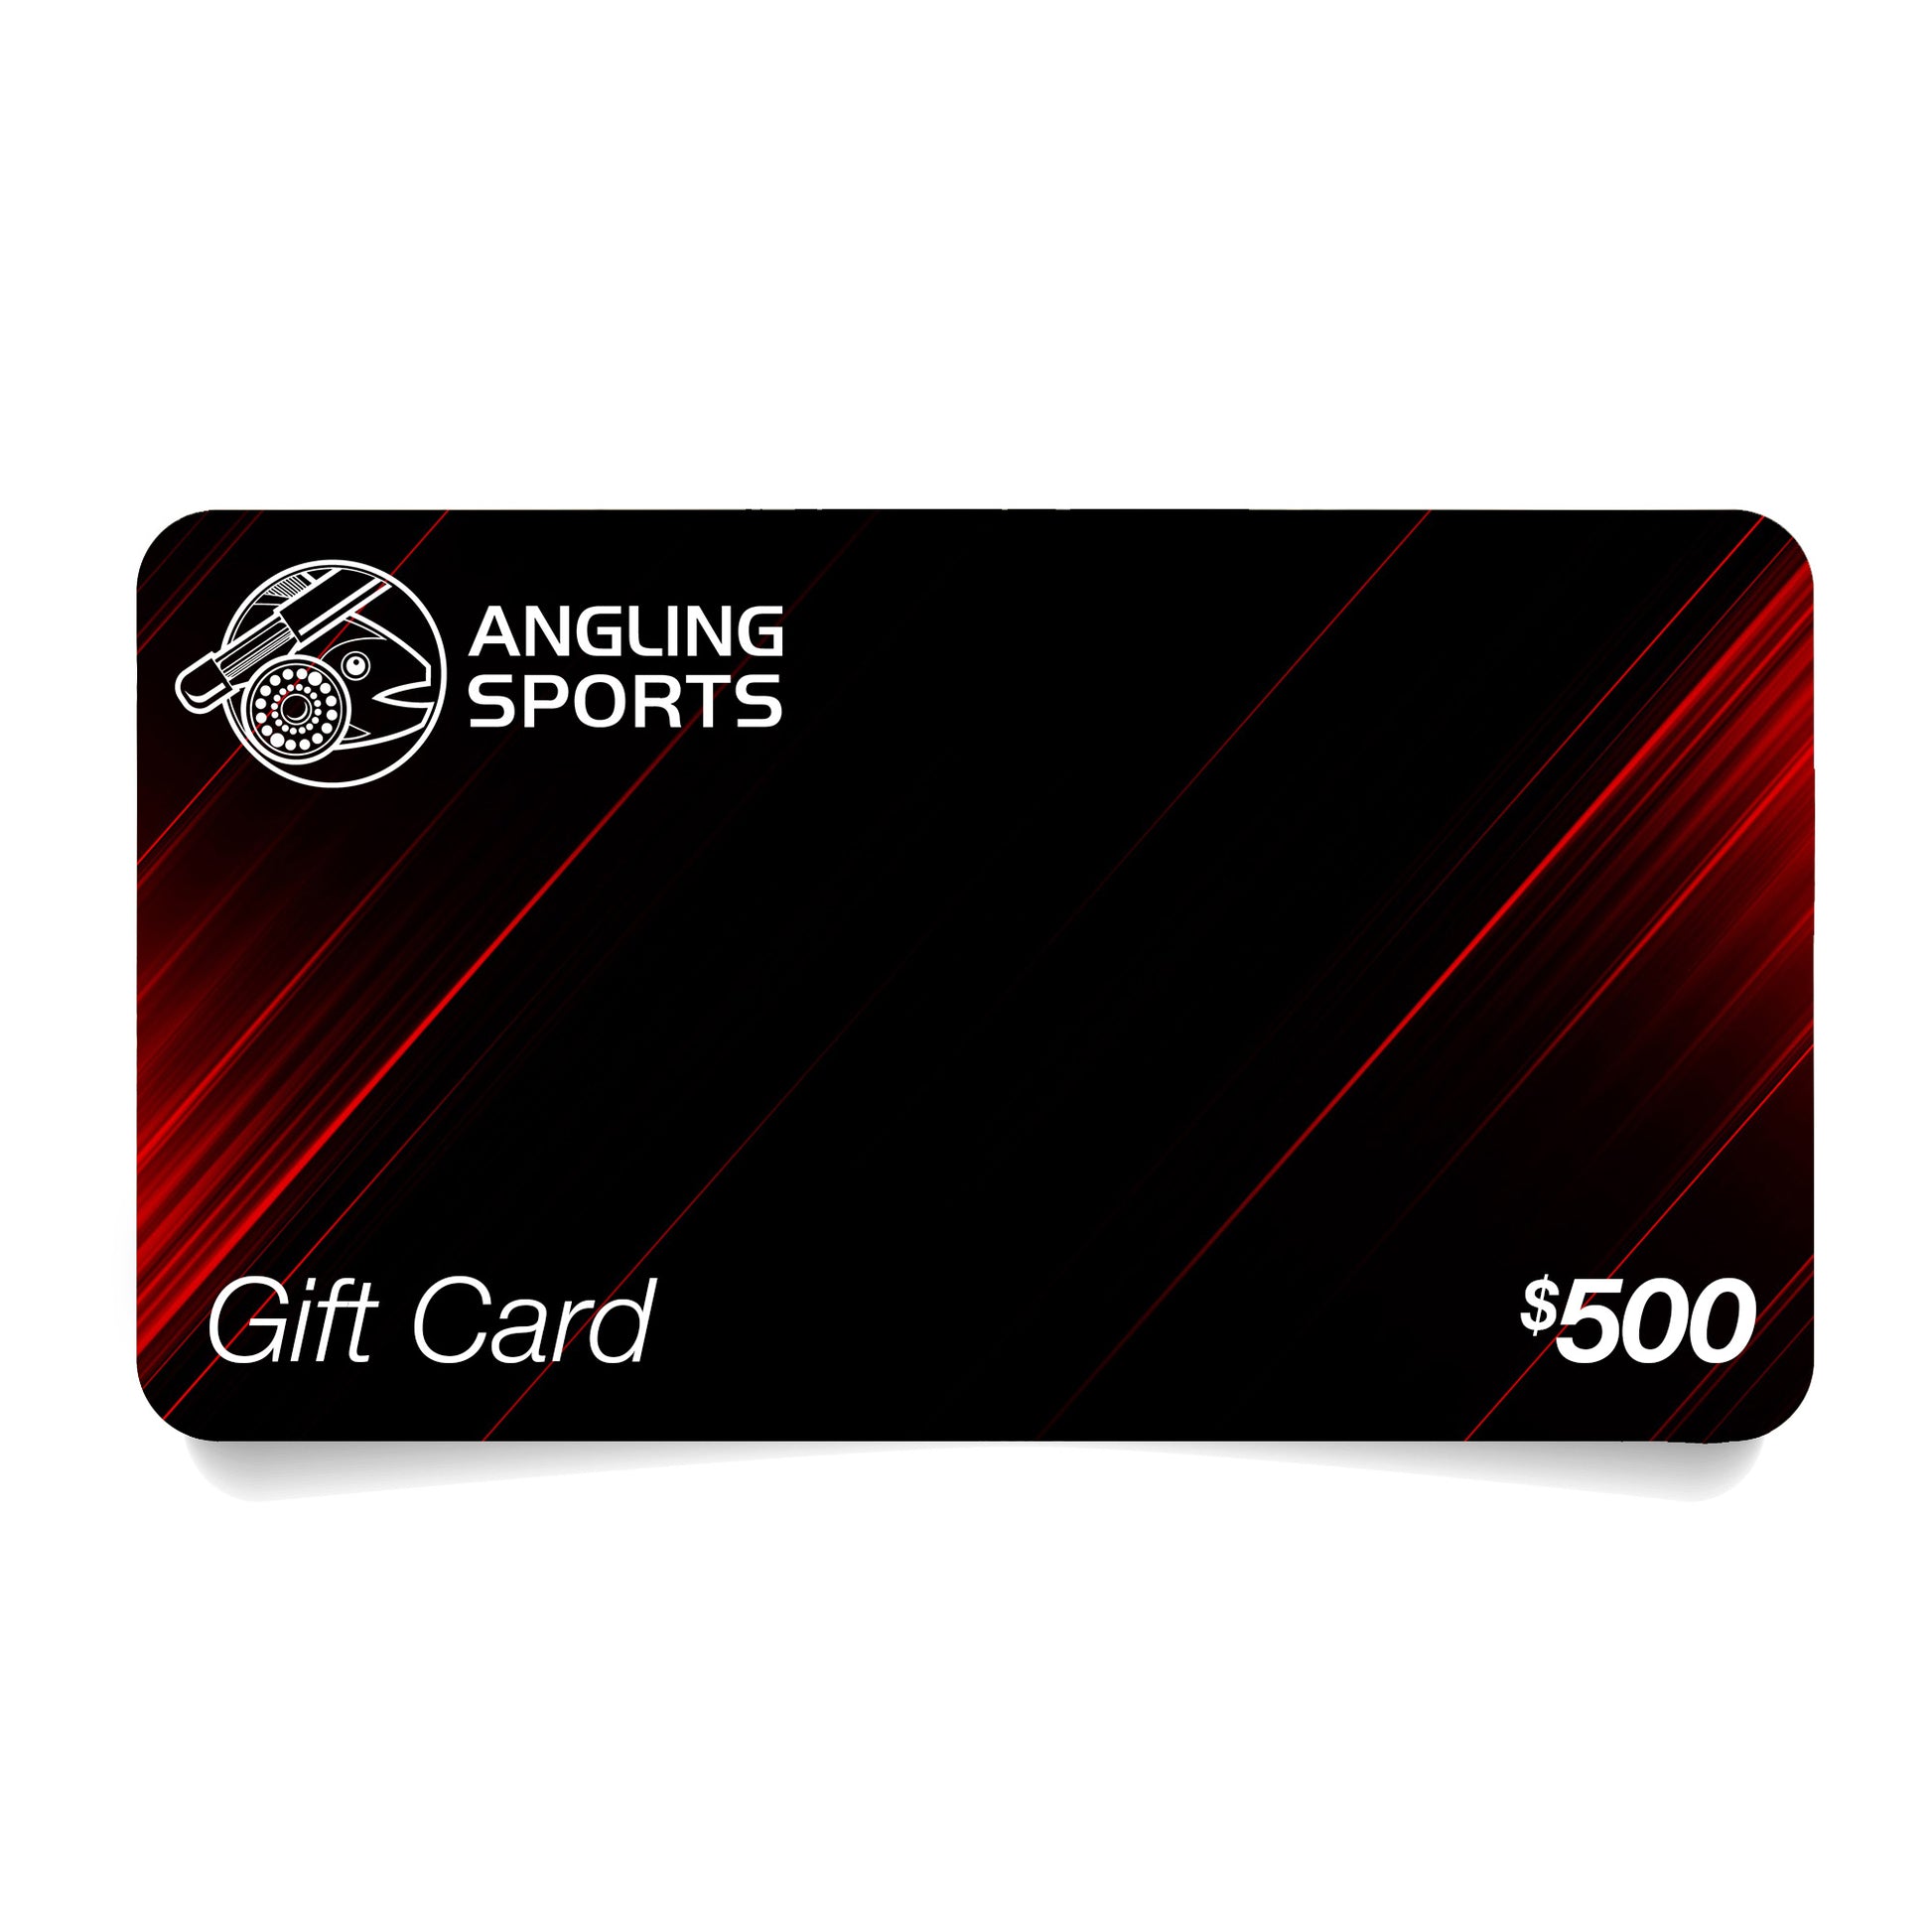 Angling Sports Gift Card $500